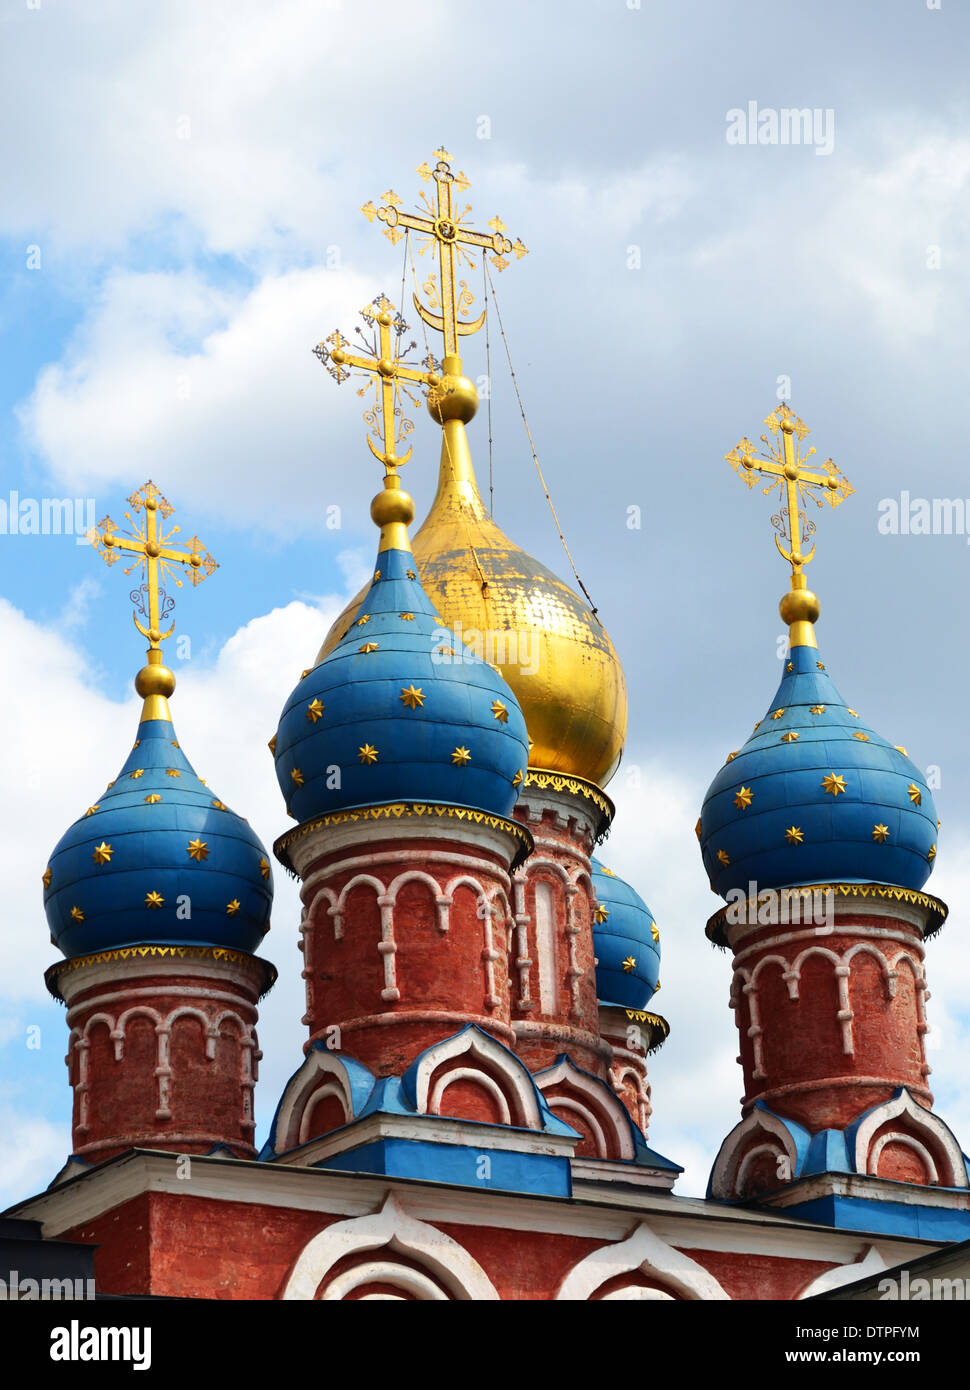 Eglise russe, Moscou, Russie Banque D'Images